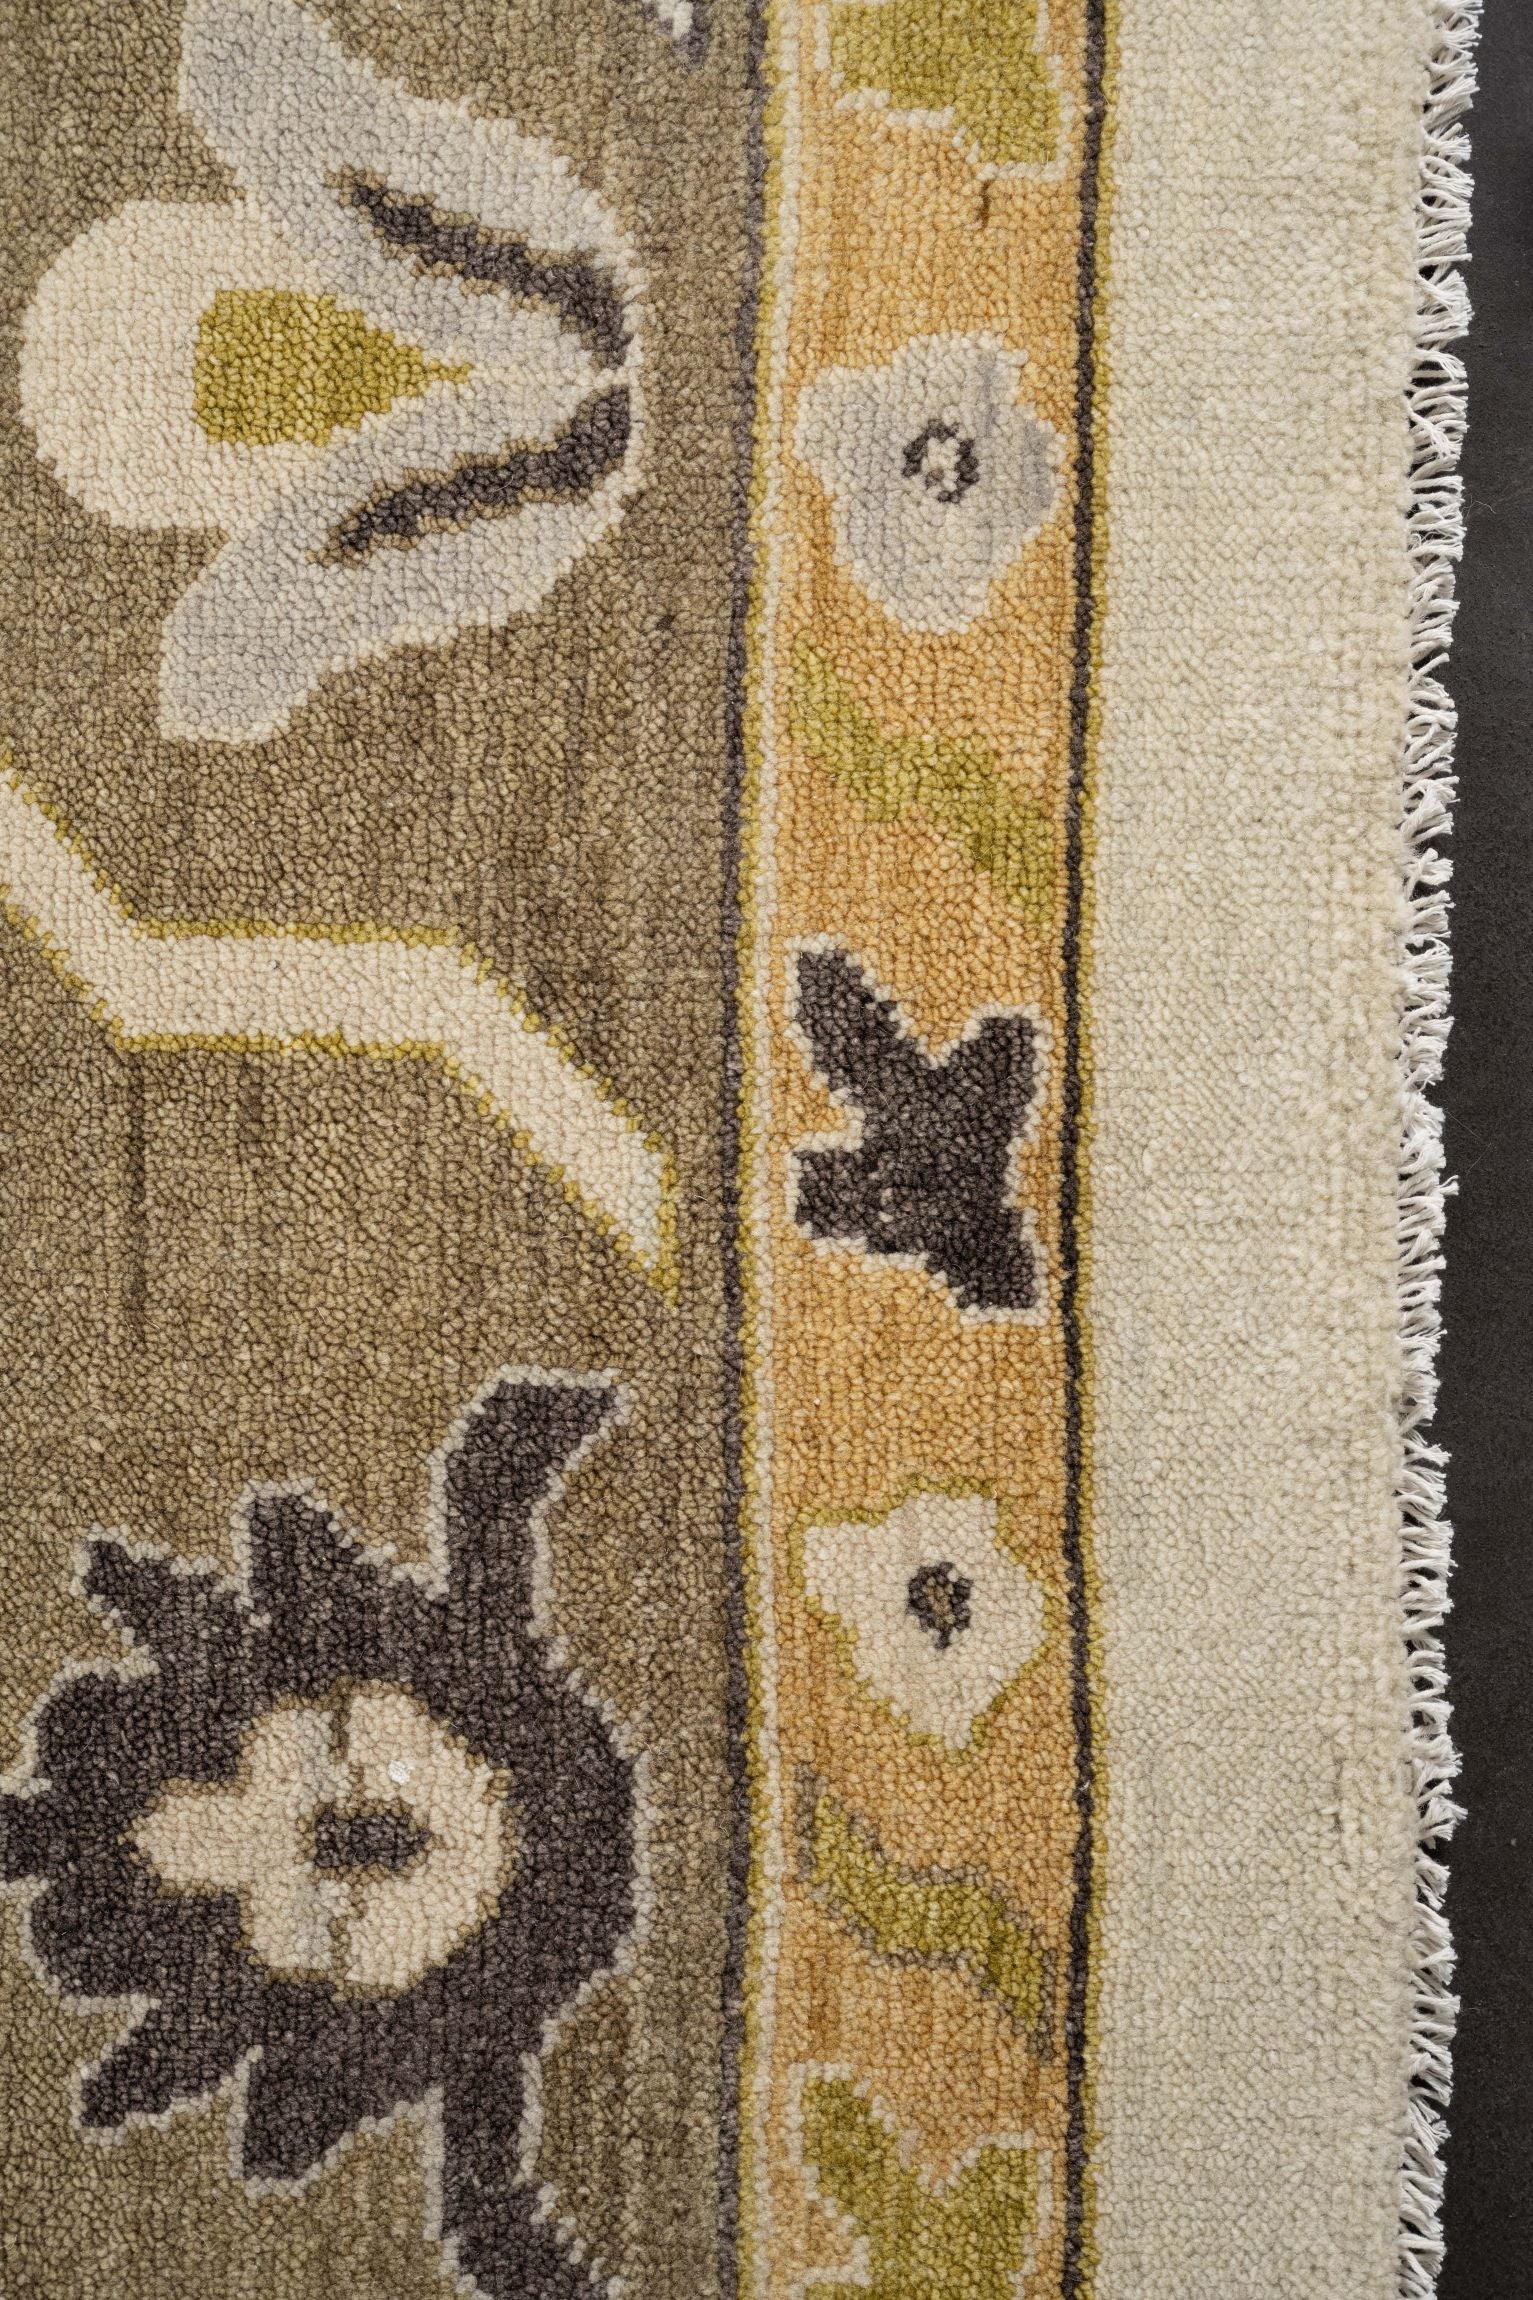 Neutral toned and hand-knotted Oushak style rug made of 100% New Zealand wool. This rug is comprised of tan, beige, brown, ivory, and charcoal colors.